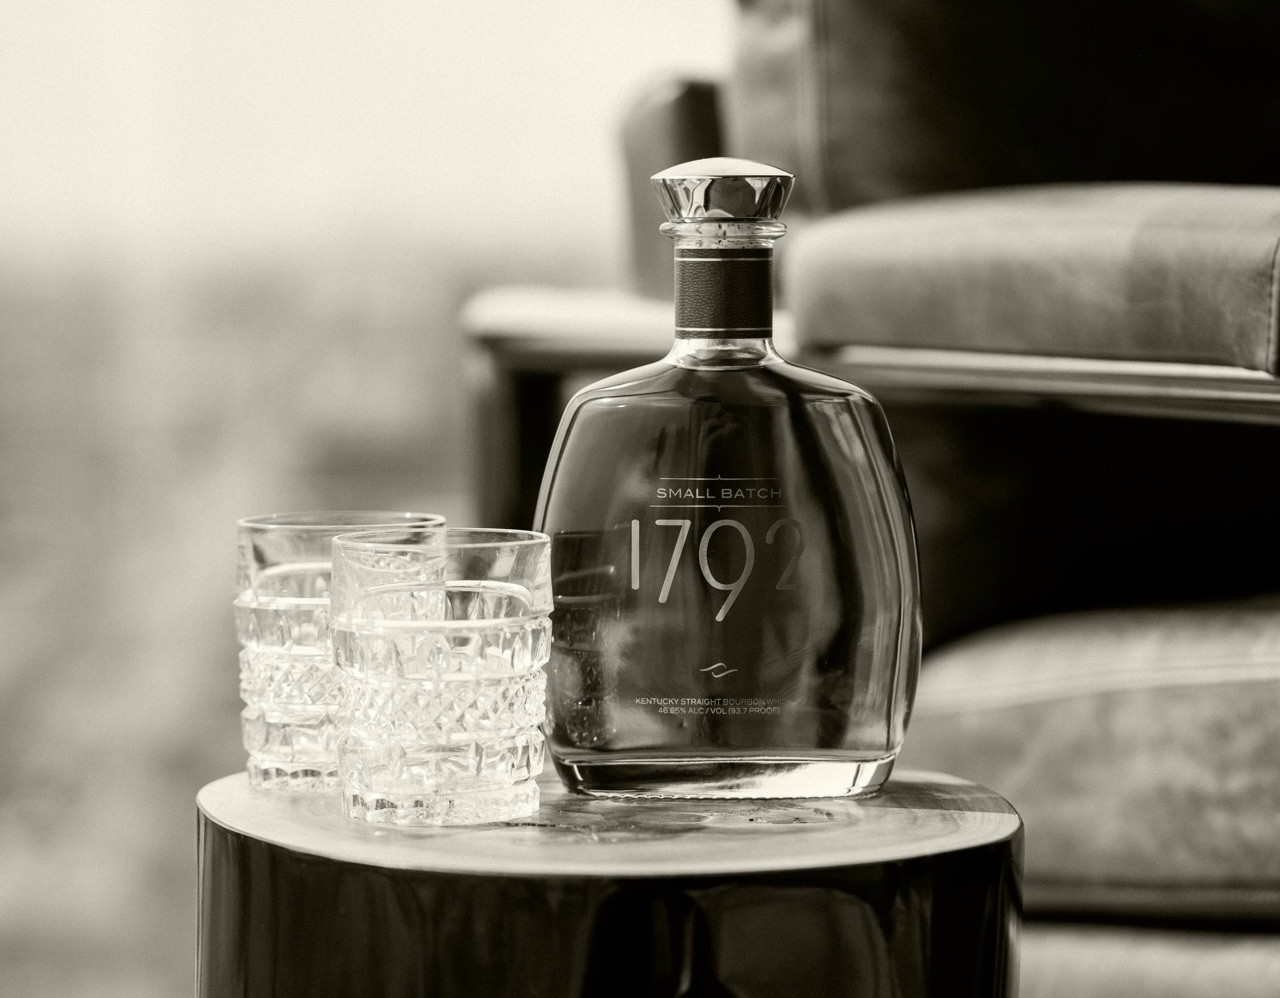 A black and white overlay of empty whiskey glasses with a 1 liter bottle of Small Batch 1792 Bourbon Whiskey